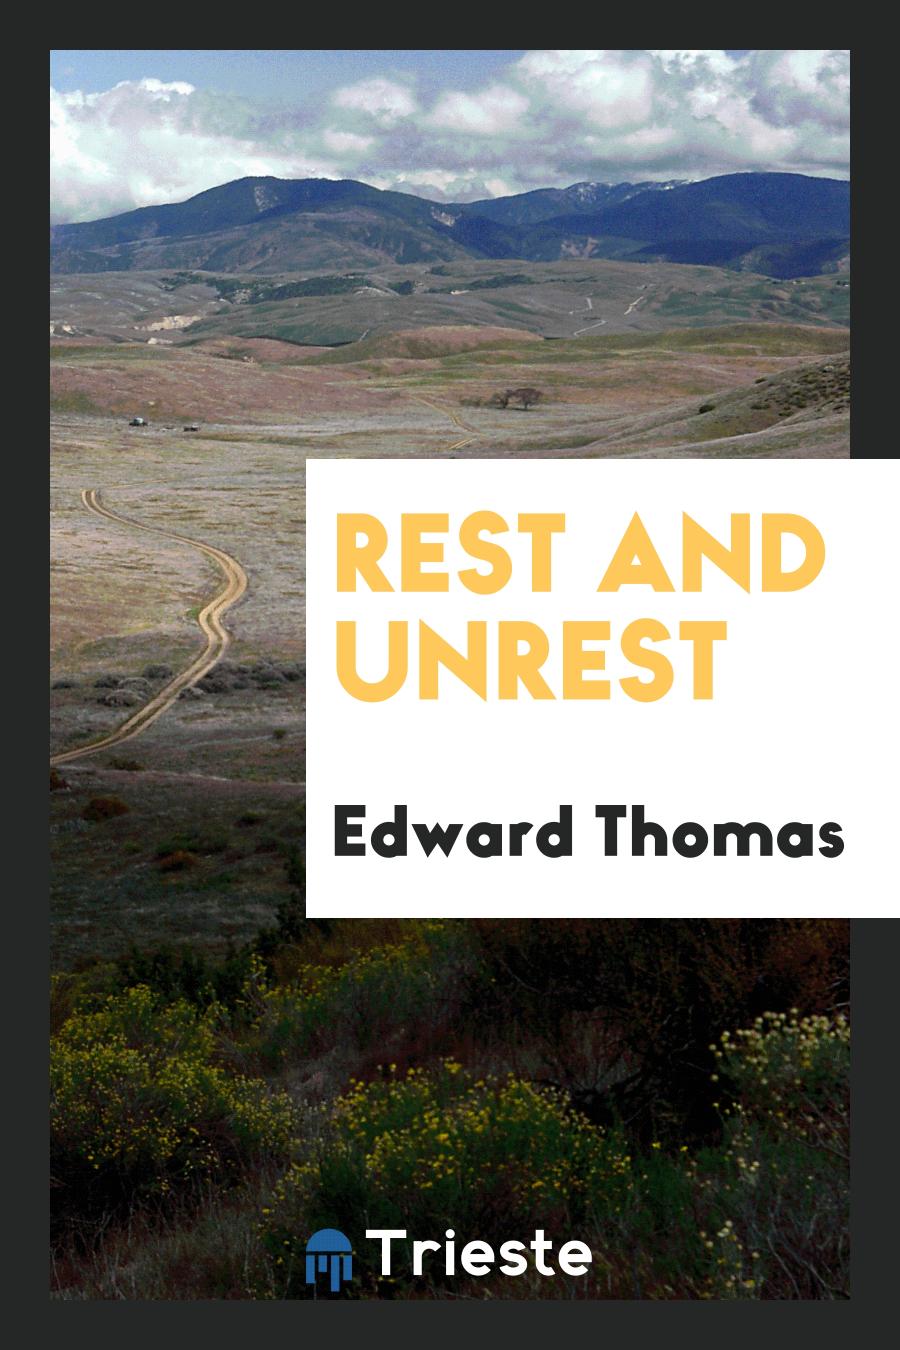 Rest and unrest